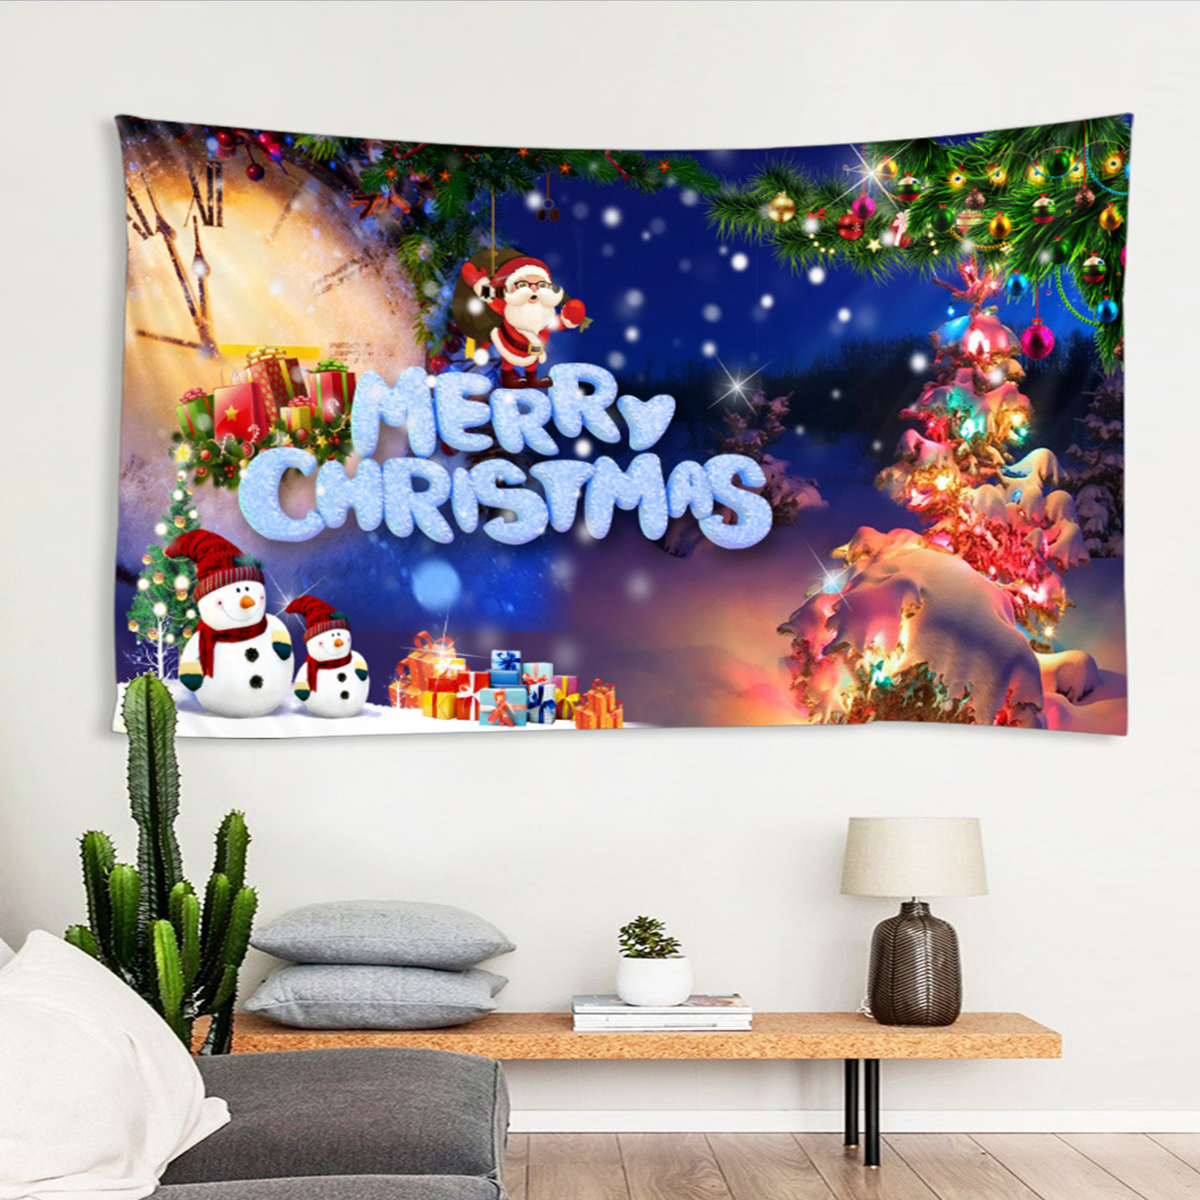 Christmas-Santa-Claus-Tapestry-Wall-Hanging-Winter-Bedspread-Throw-Blanket-Photography-Backdrop-Back-1912686-4